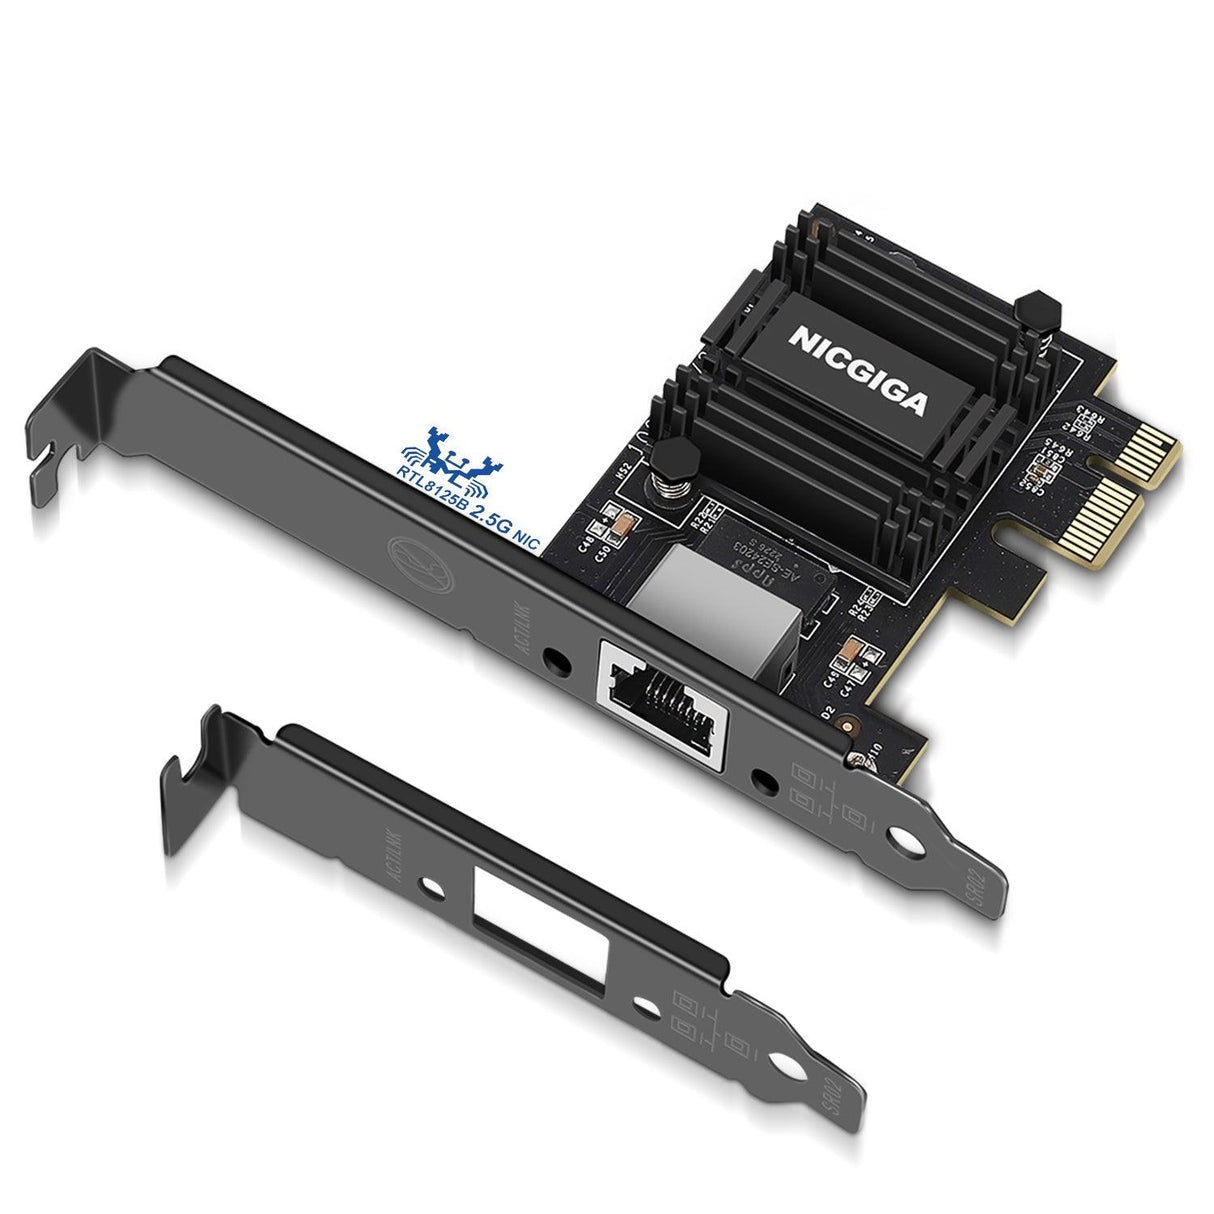 NICGIGA 2.5G Base-T PCIe Network Adapter, Realtek RTL8125B 2.5Gbps/1Gbps/100Mbps PCI Express Gigabit Network Card Convert to Ethernet RJ45 LAN Port for Gaming/Office, Support Windows/Linux